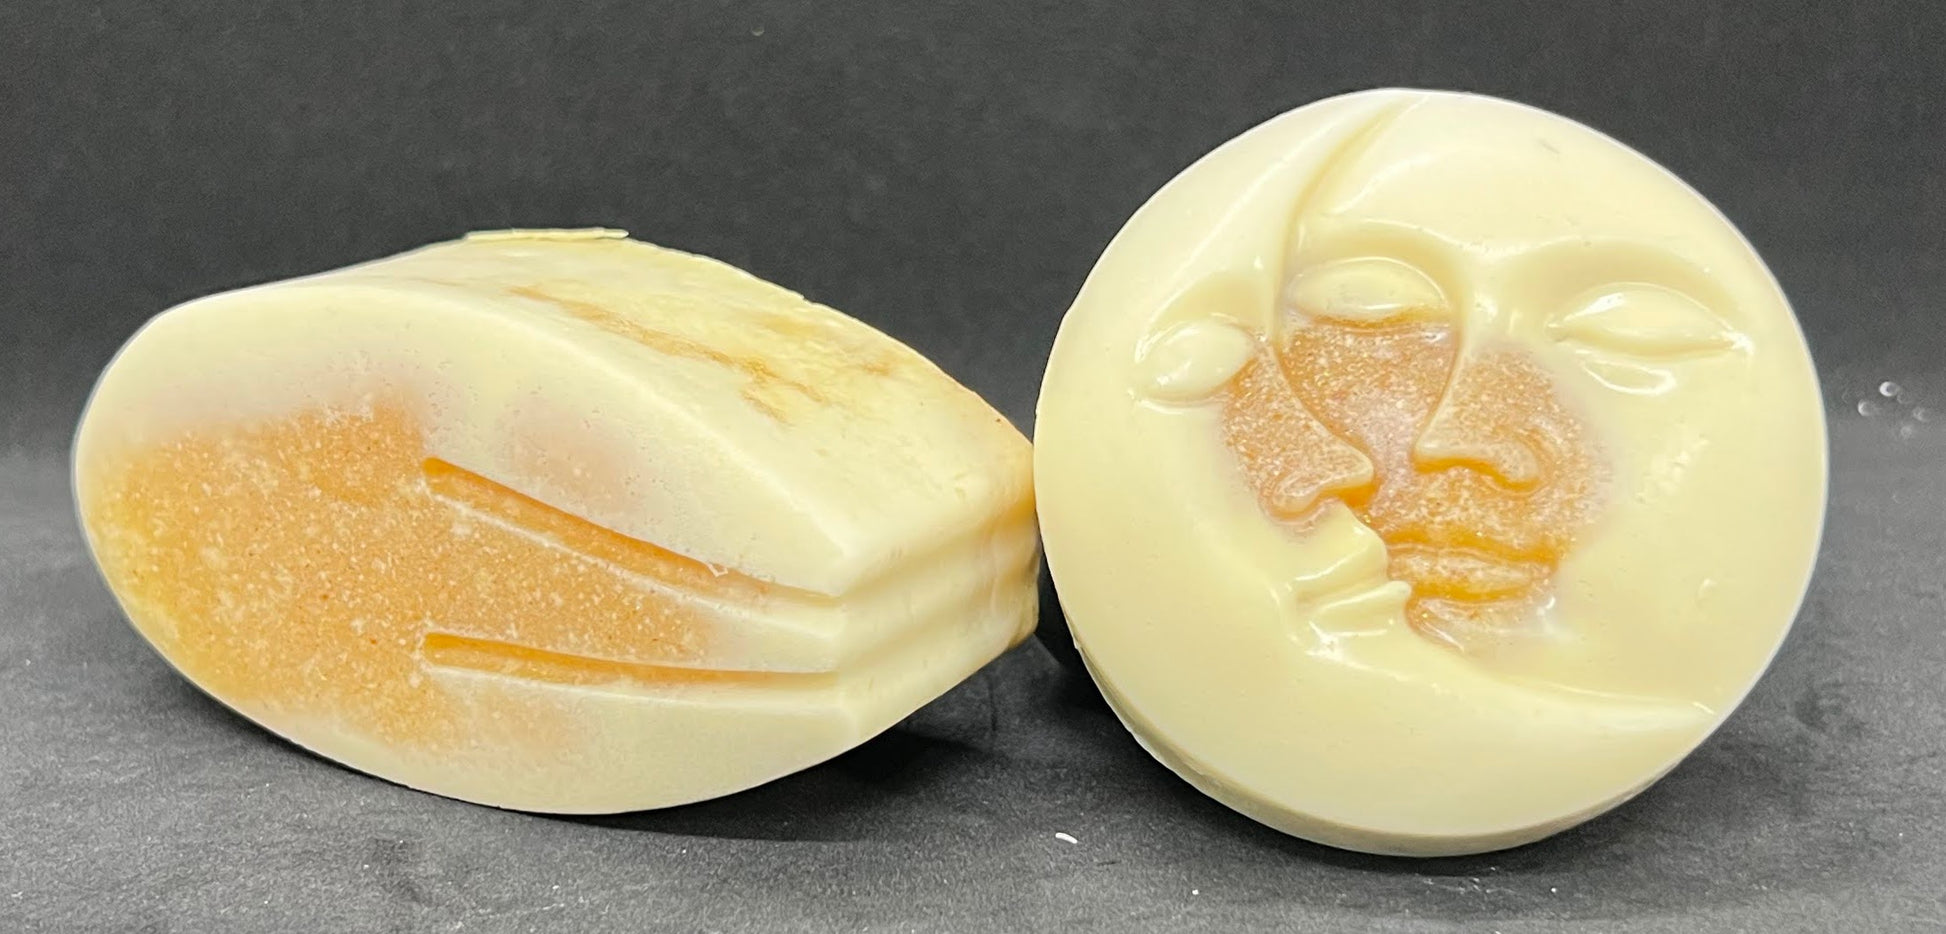 The colloidal oats & honey body and facial bar is a luxurious and nourishing addition to your skincare regimen. Handcrafted with care, this soap combines the soothing properties of colloidal oats with the moisturizing benefits of honey to provide a gentle and indulgent golden bathing experience.